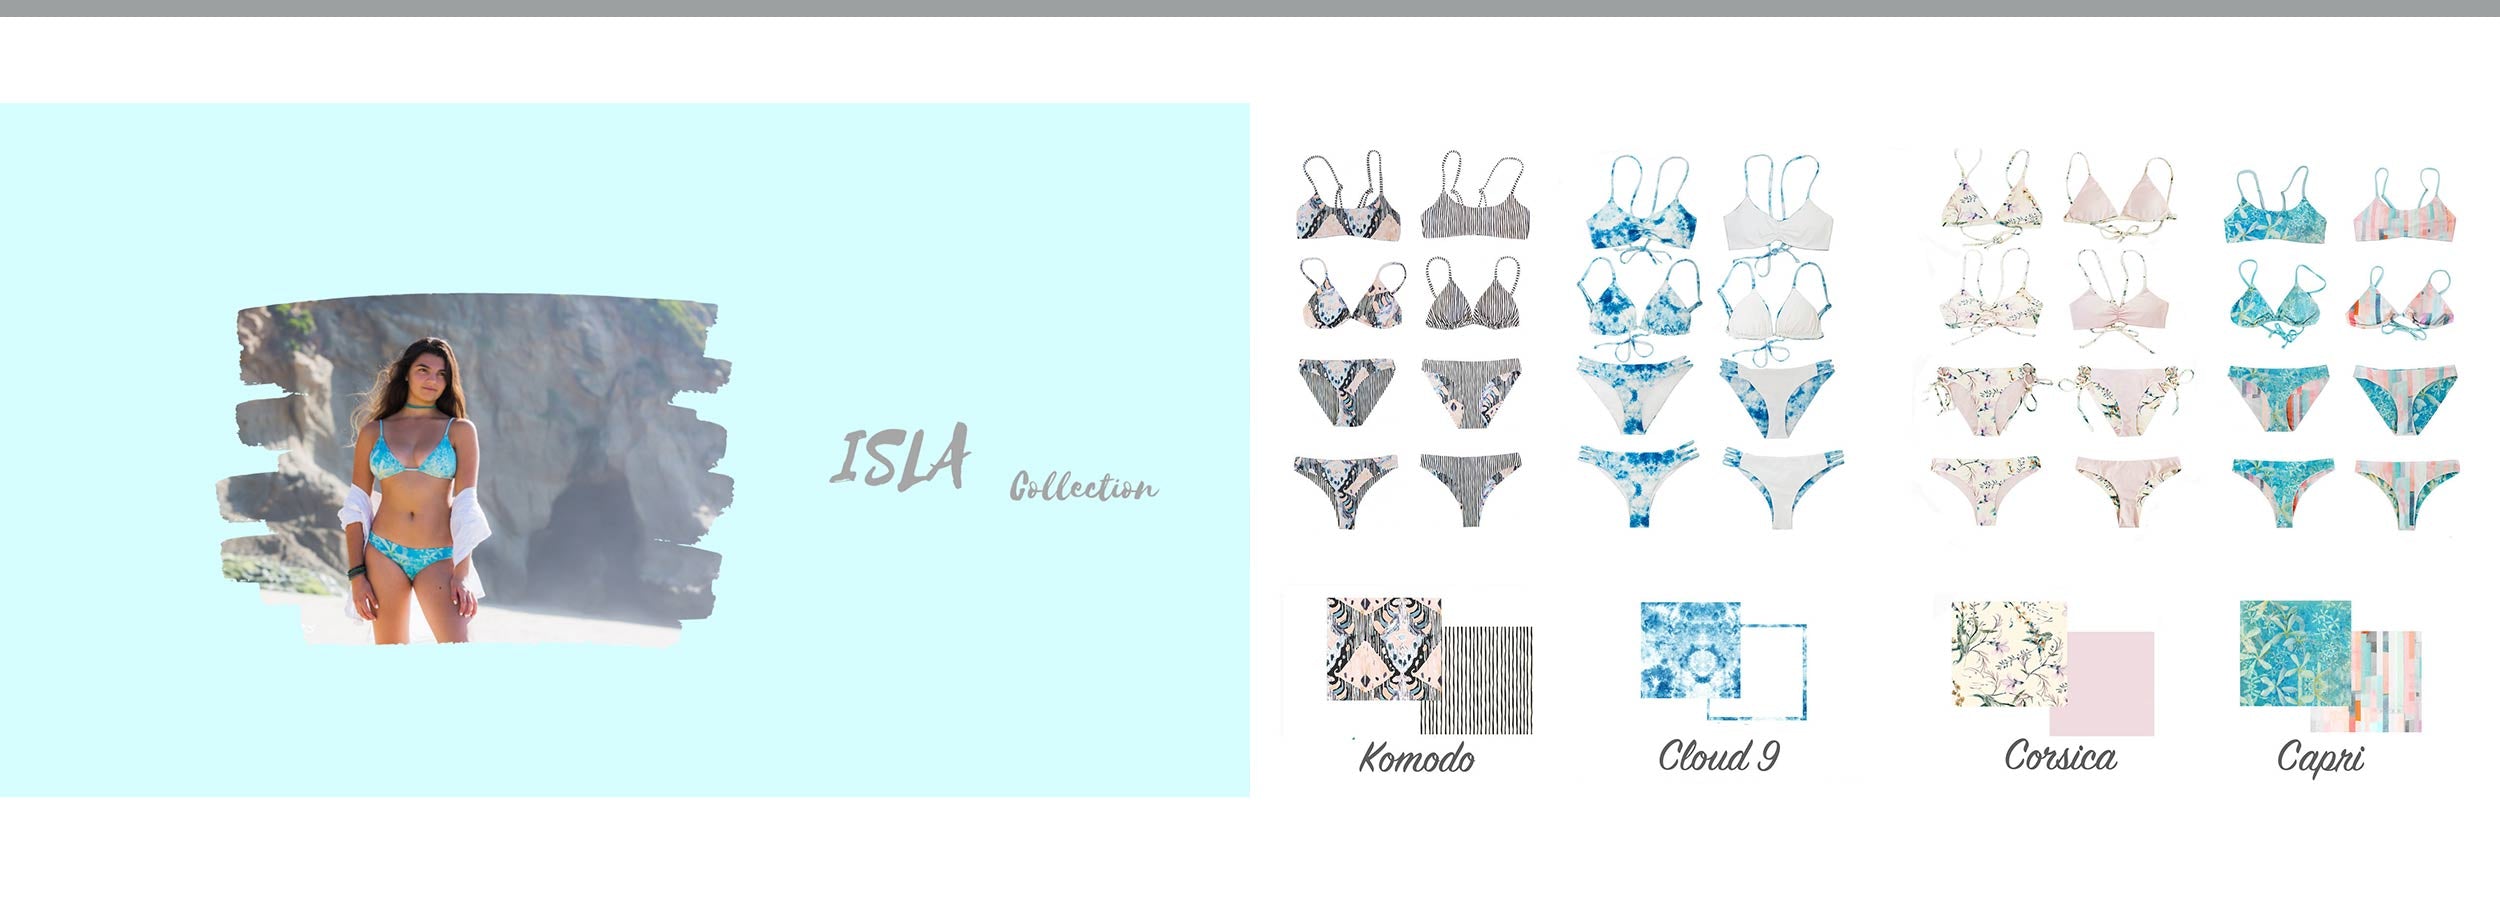 isla-collection-chanceloves-reversible-swimwear-brand-teen-girls-young-women-swimsuits-sustainable-fashion